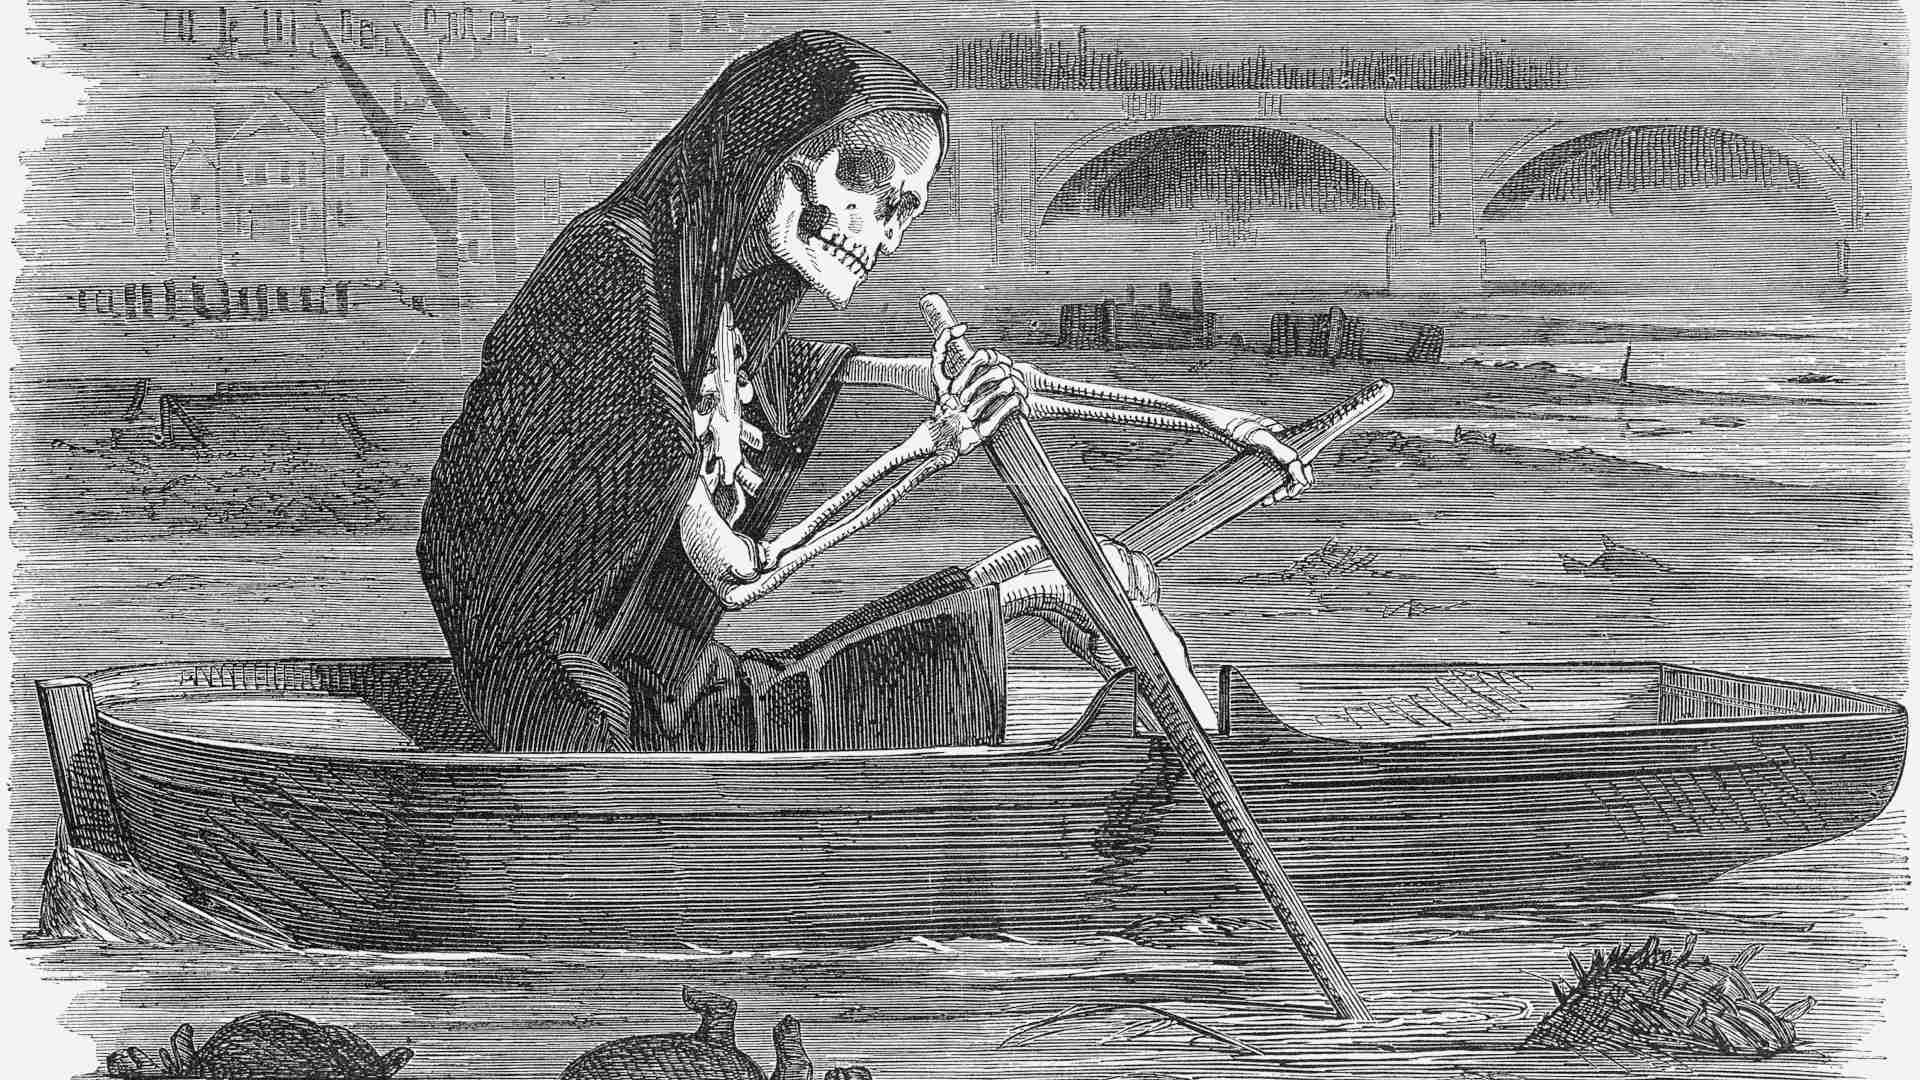 "The Silent Highway - Man," an 1858 cartoon from Punch magazine showing Death rowing the waters of the River Thames, which were choked with human and animal excrement.